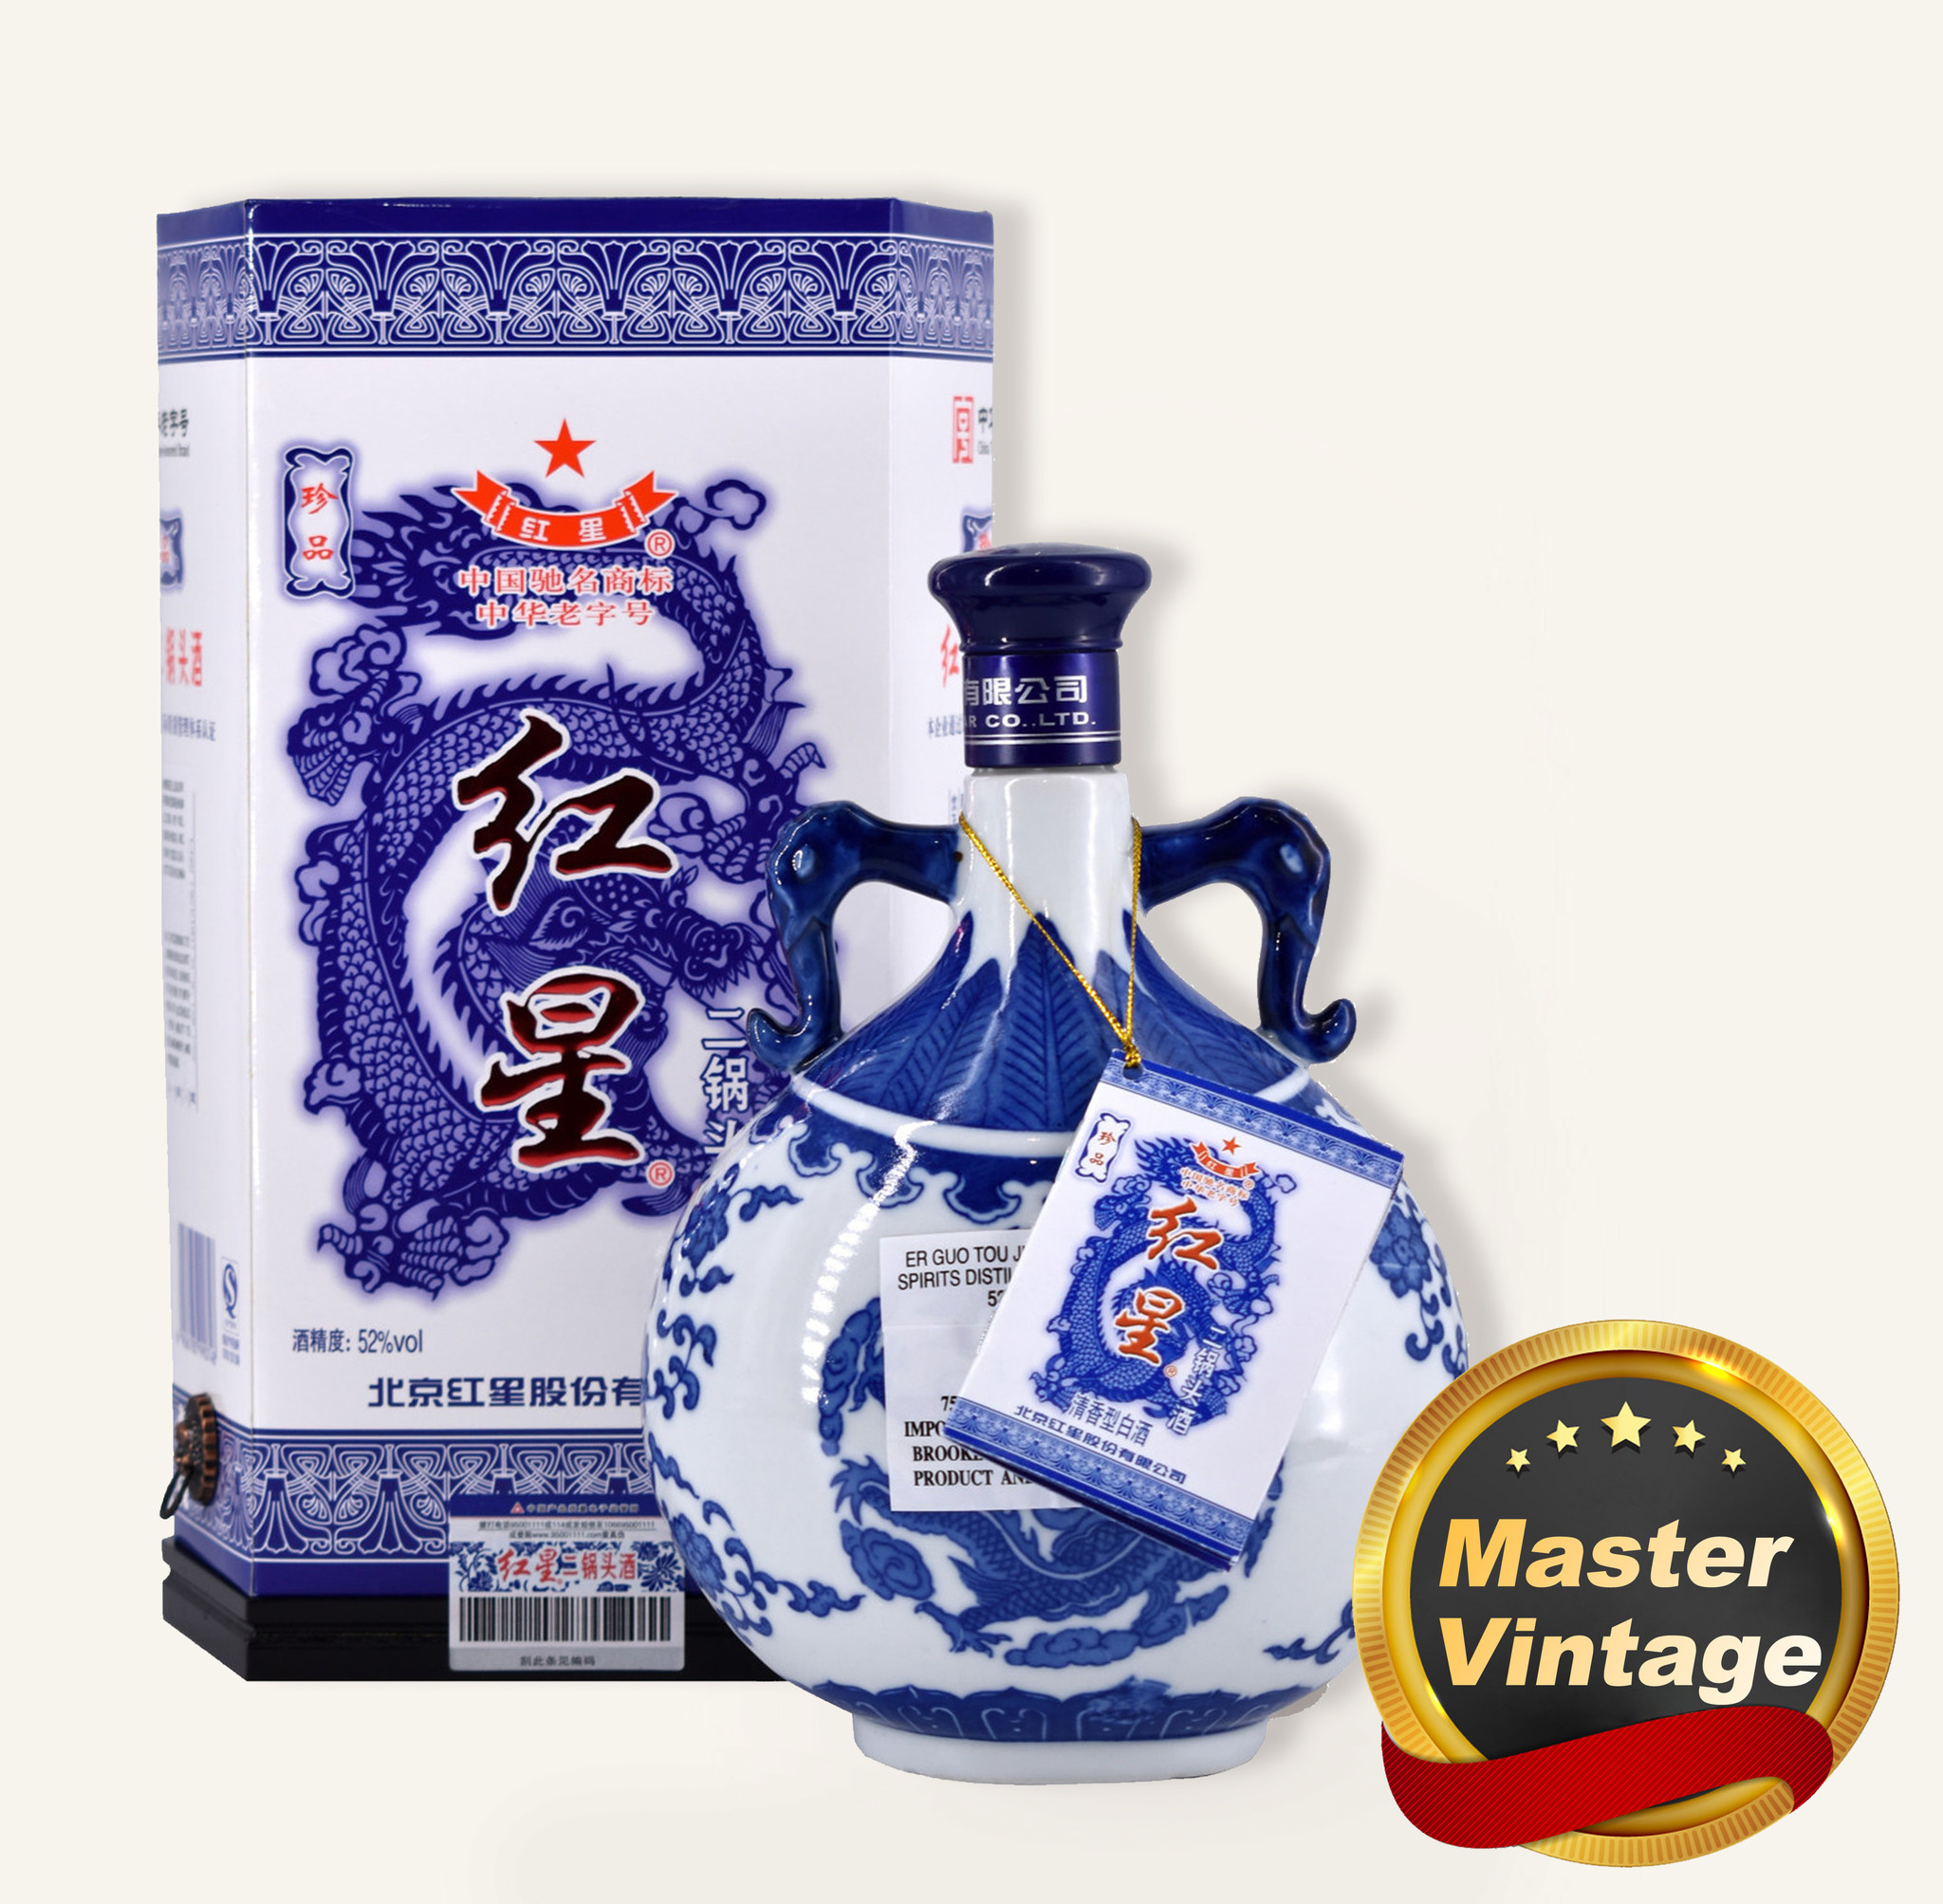 Hongxing Erguotou ZhenPin 红星二锅头珍品$52 FREE DELIVERY - Uncle Fossil Wine&Spirits